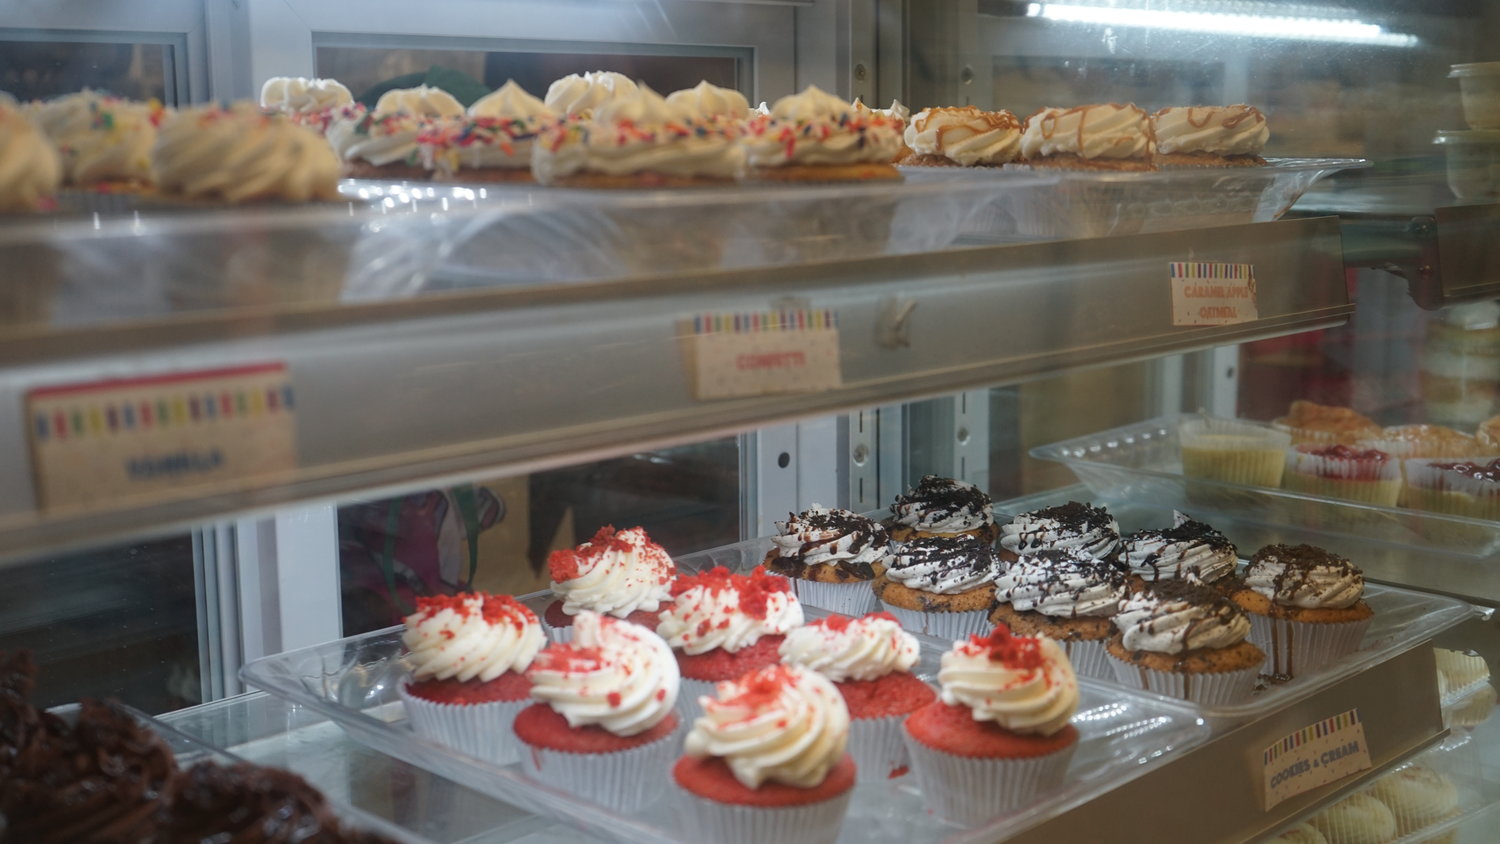 In addition to cakes, the shop provides a variety of sweets.